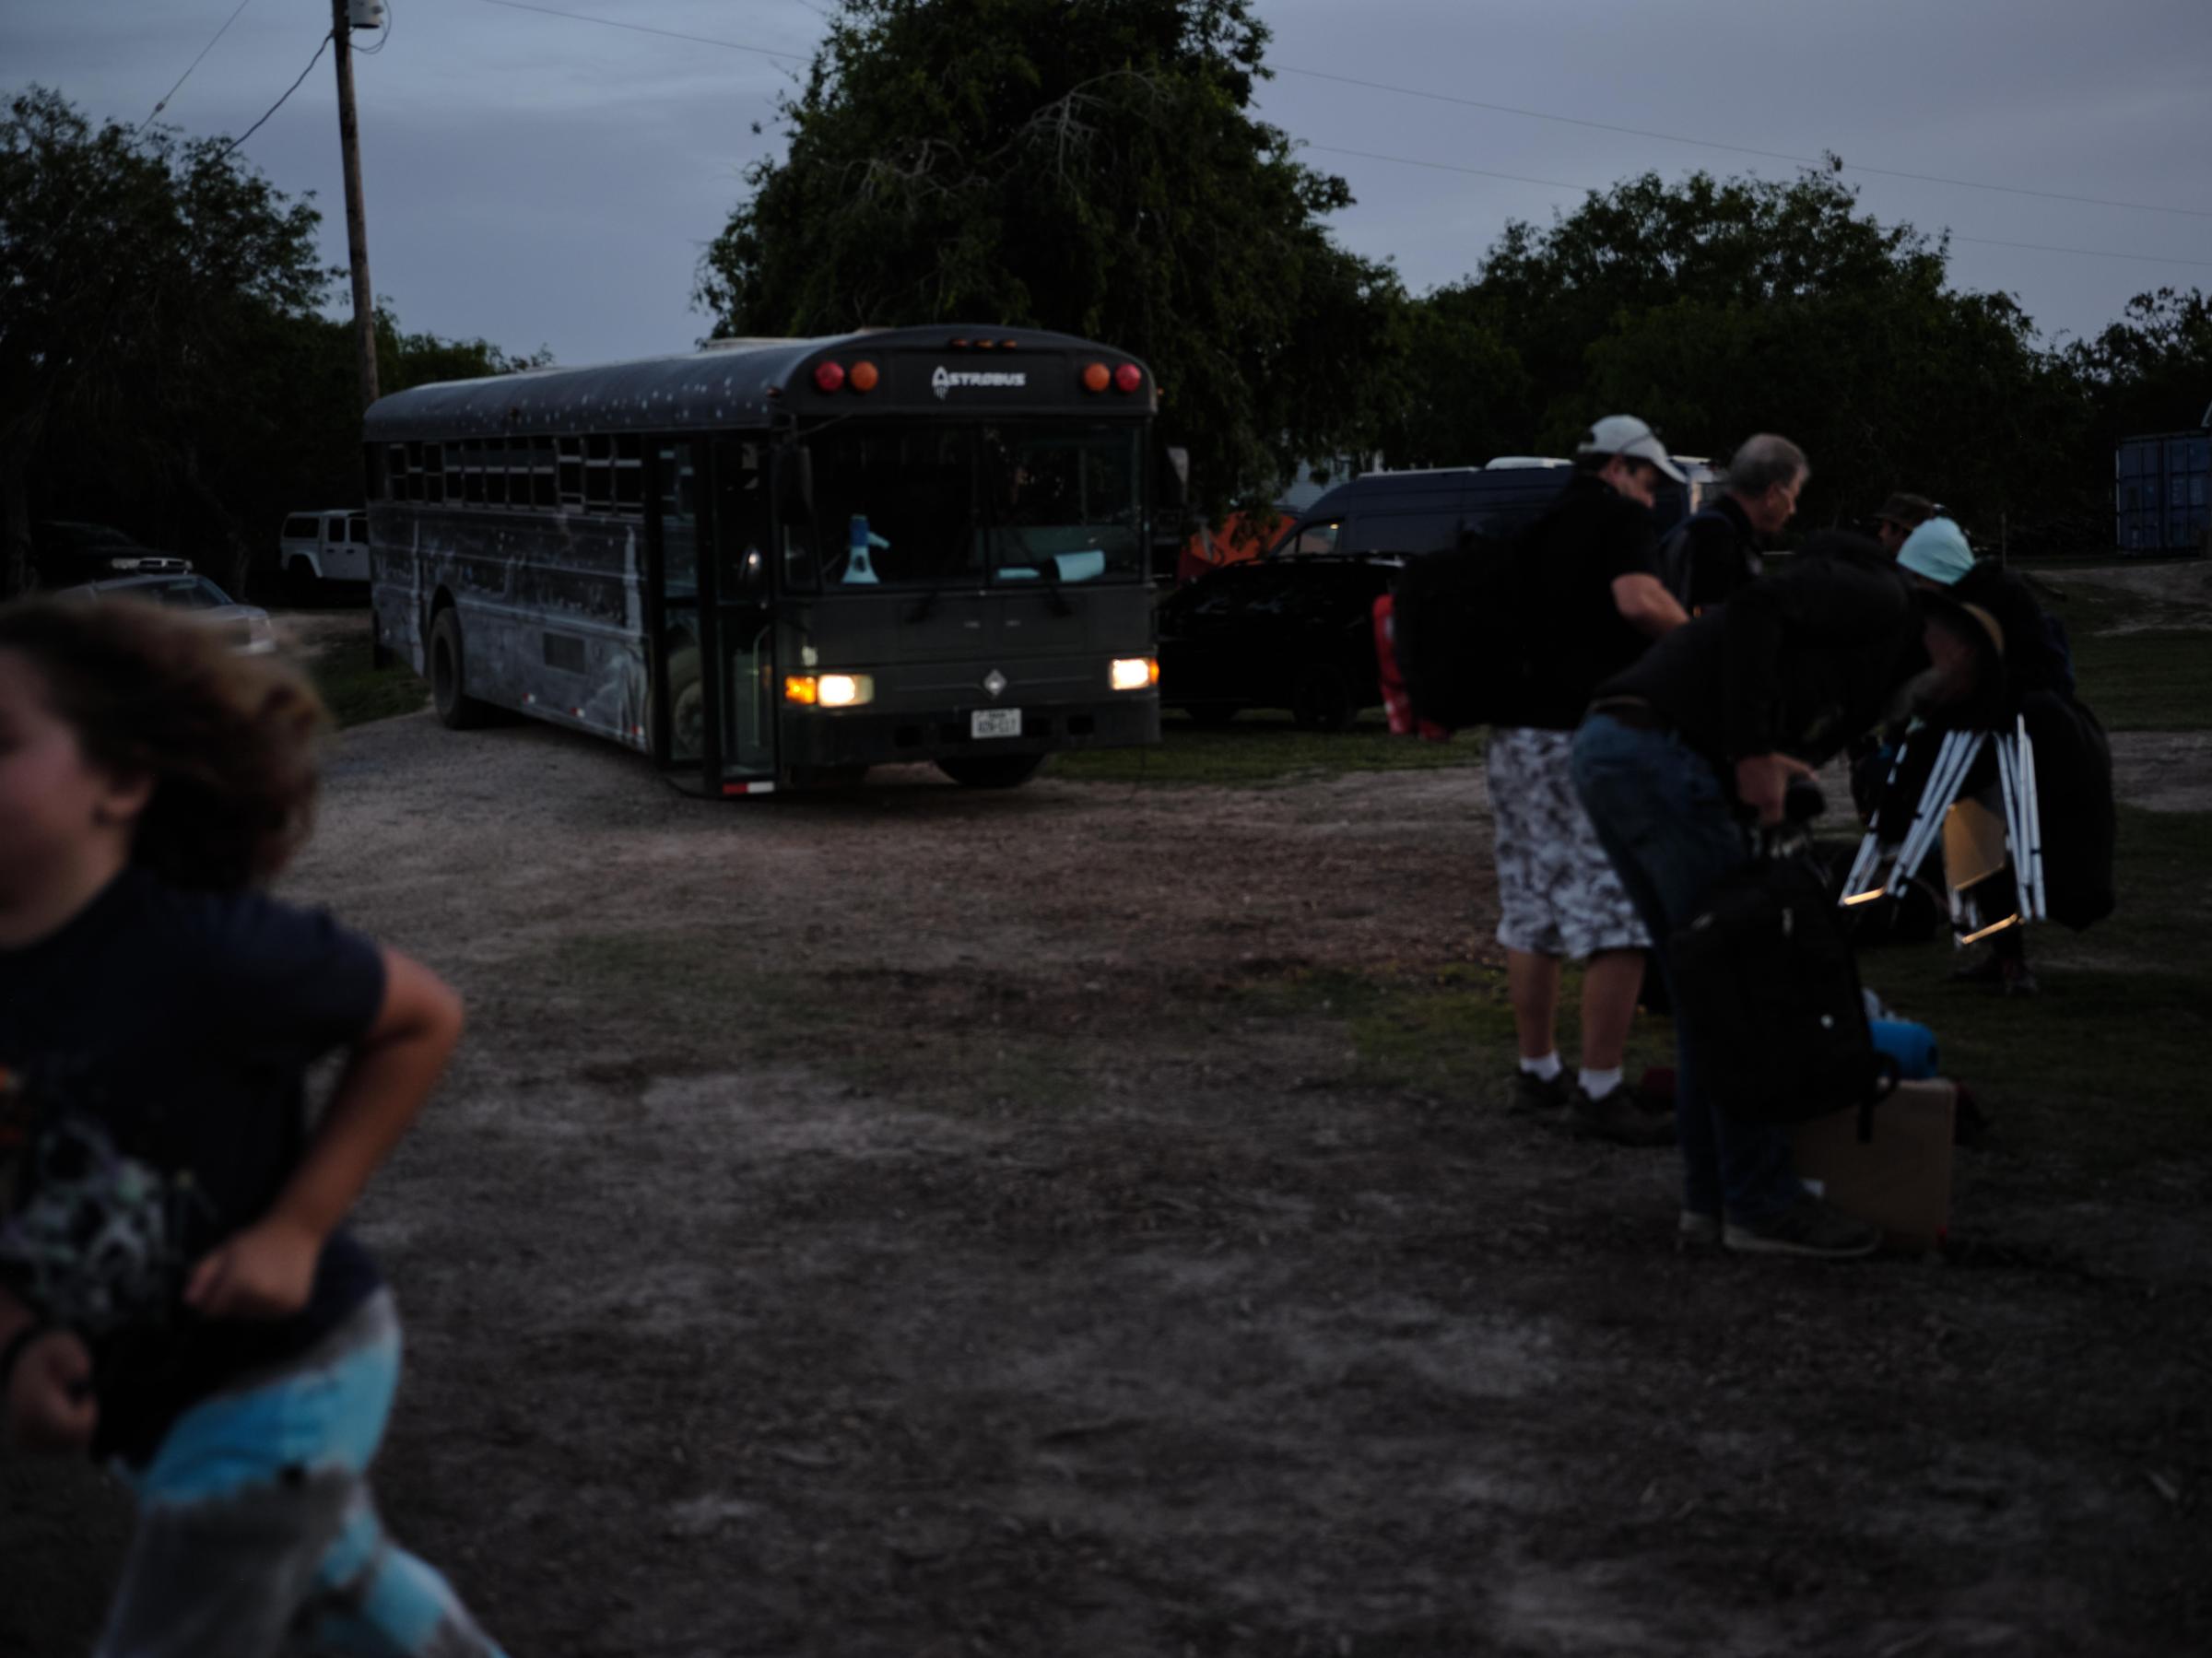 Rocket Ranch - Spectators get ready to board the Astrobus to camp out at...